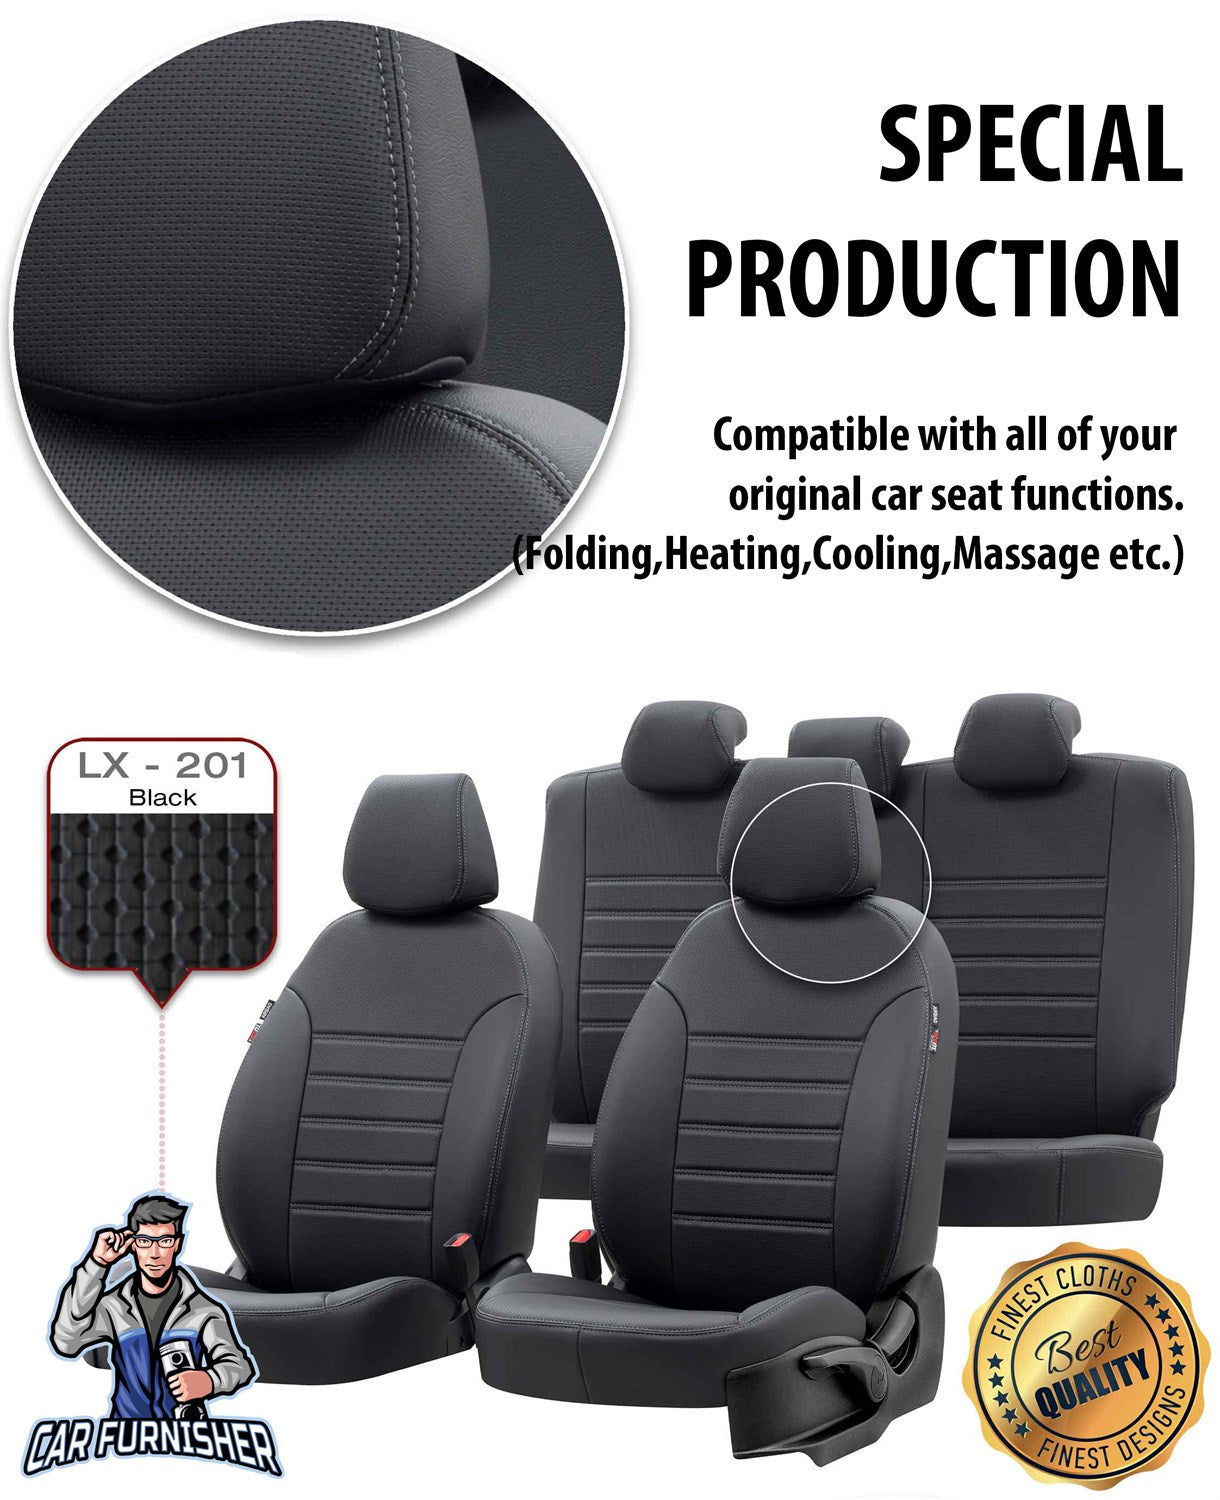 Mitsubishi Lancer Seat Covers New York Leather Design Smoked Leather